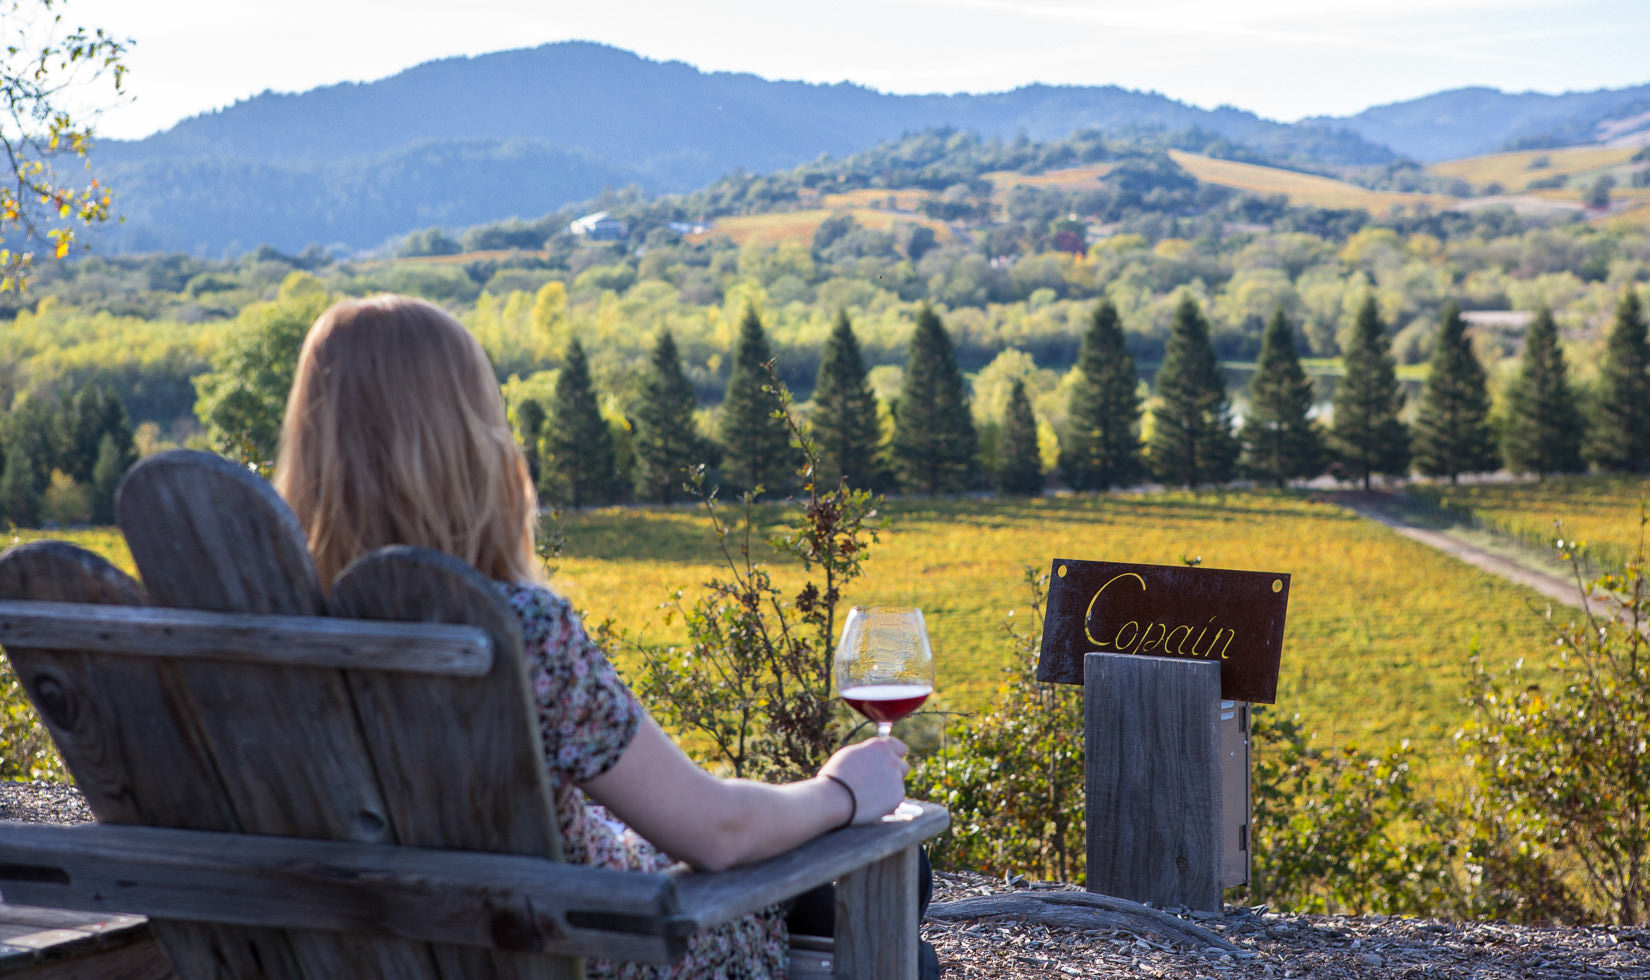 Winery with a view: Copain Wines